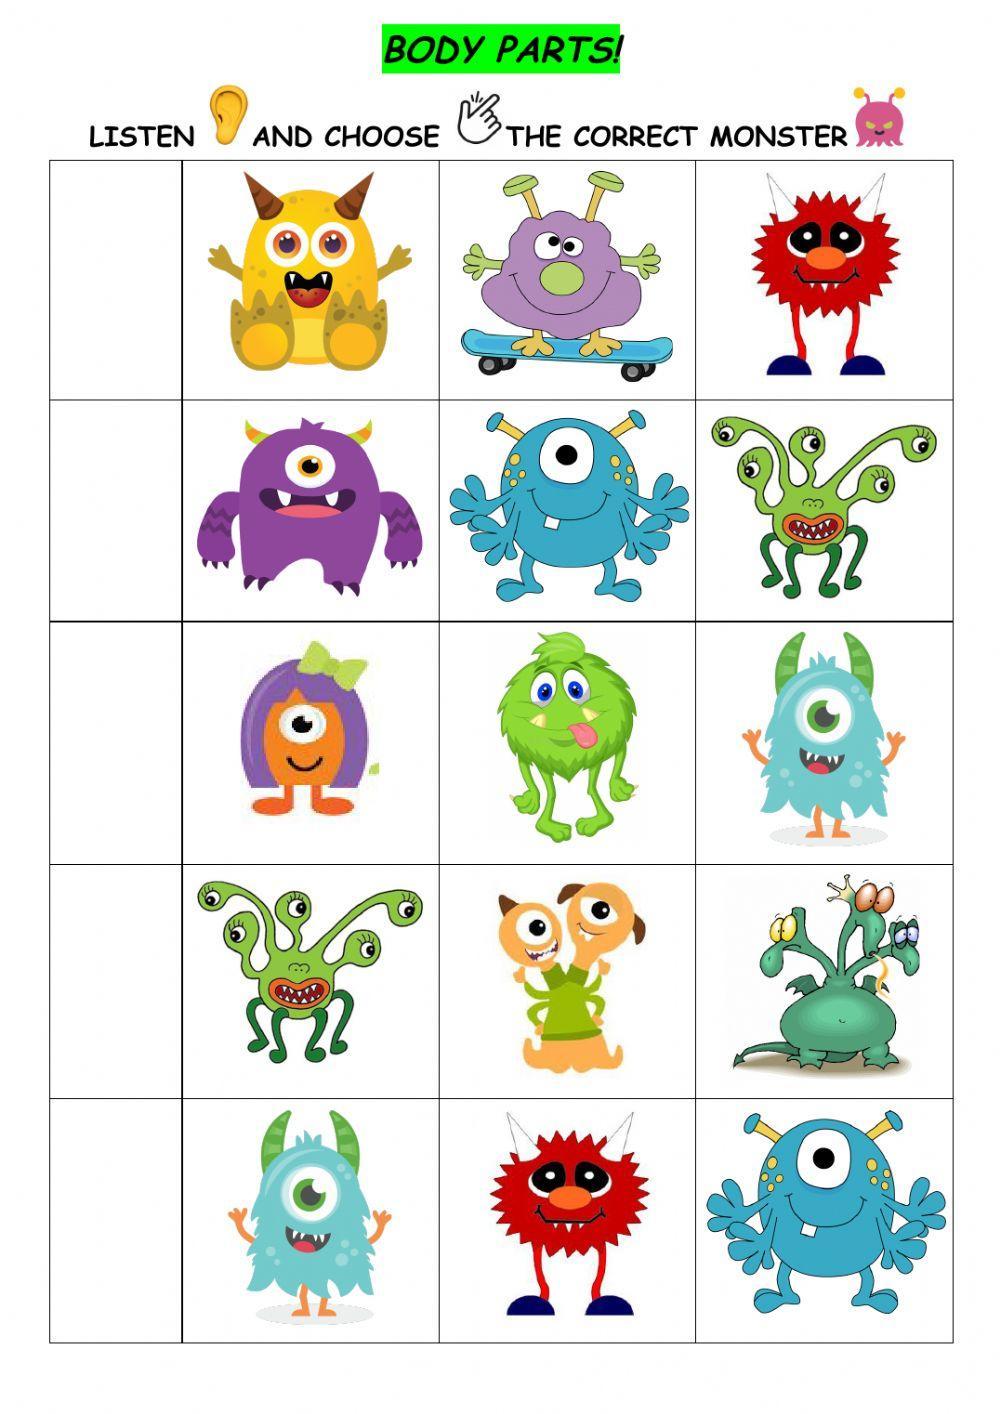 Body parts - Monsters activity | Live Worksheets